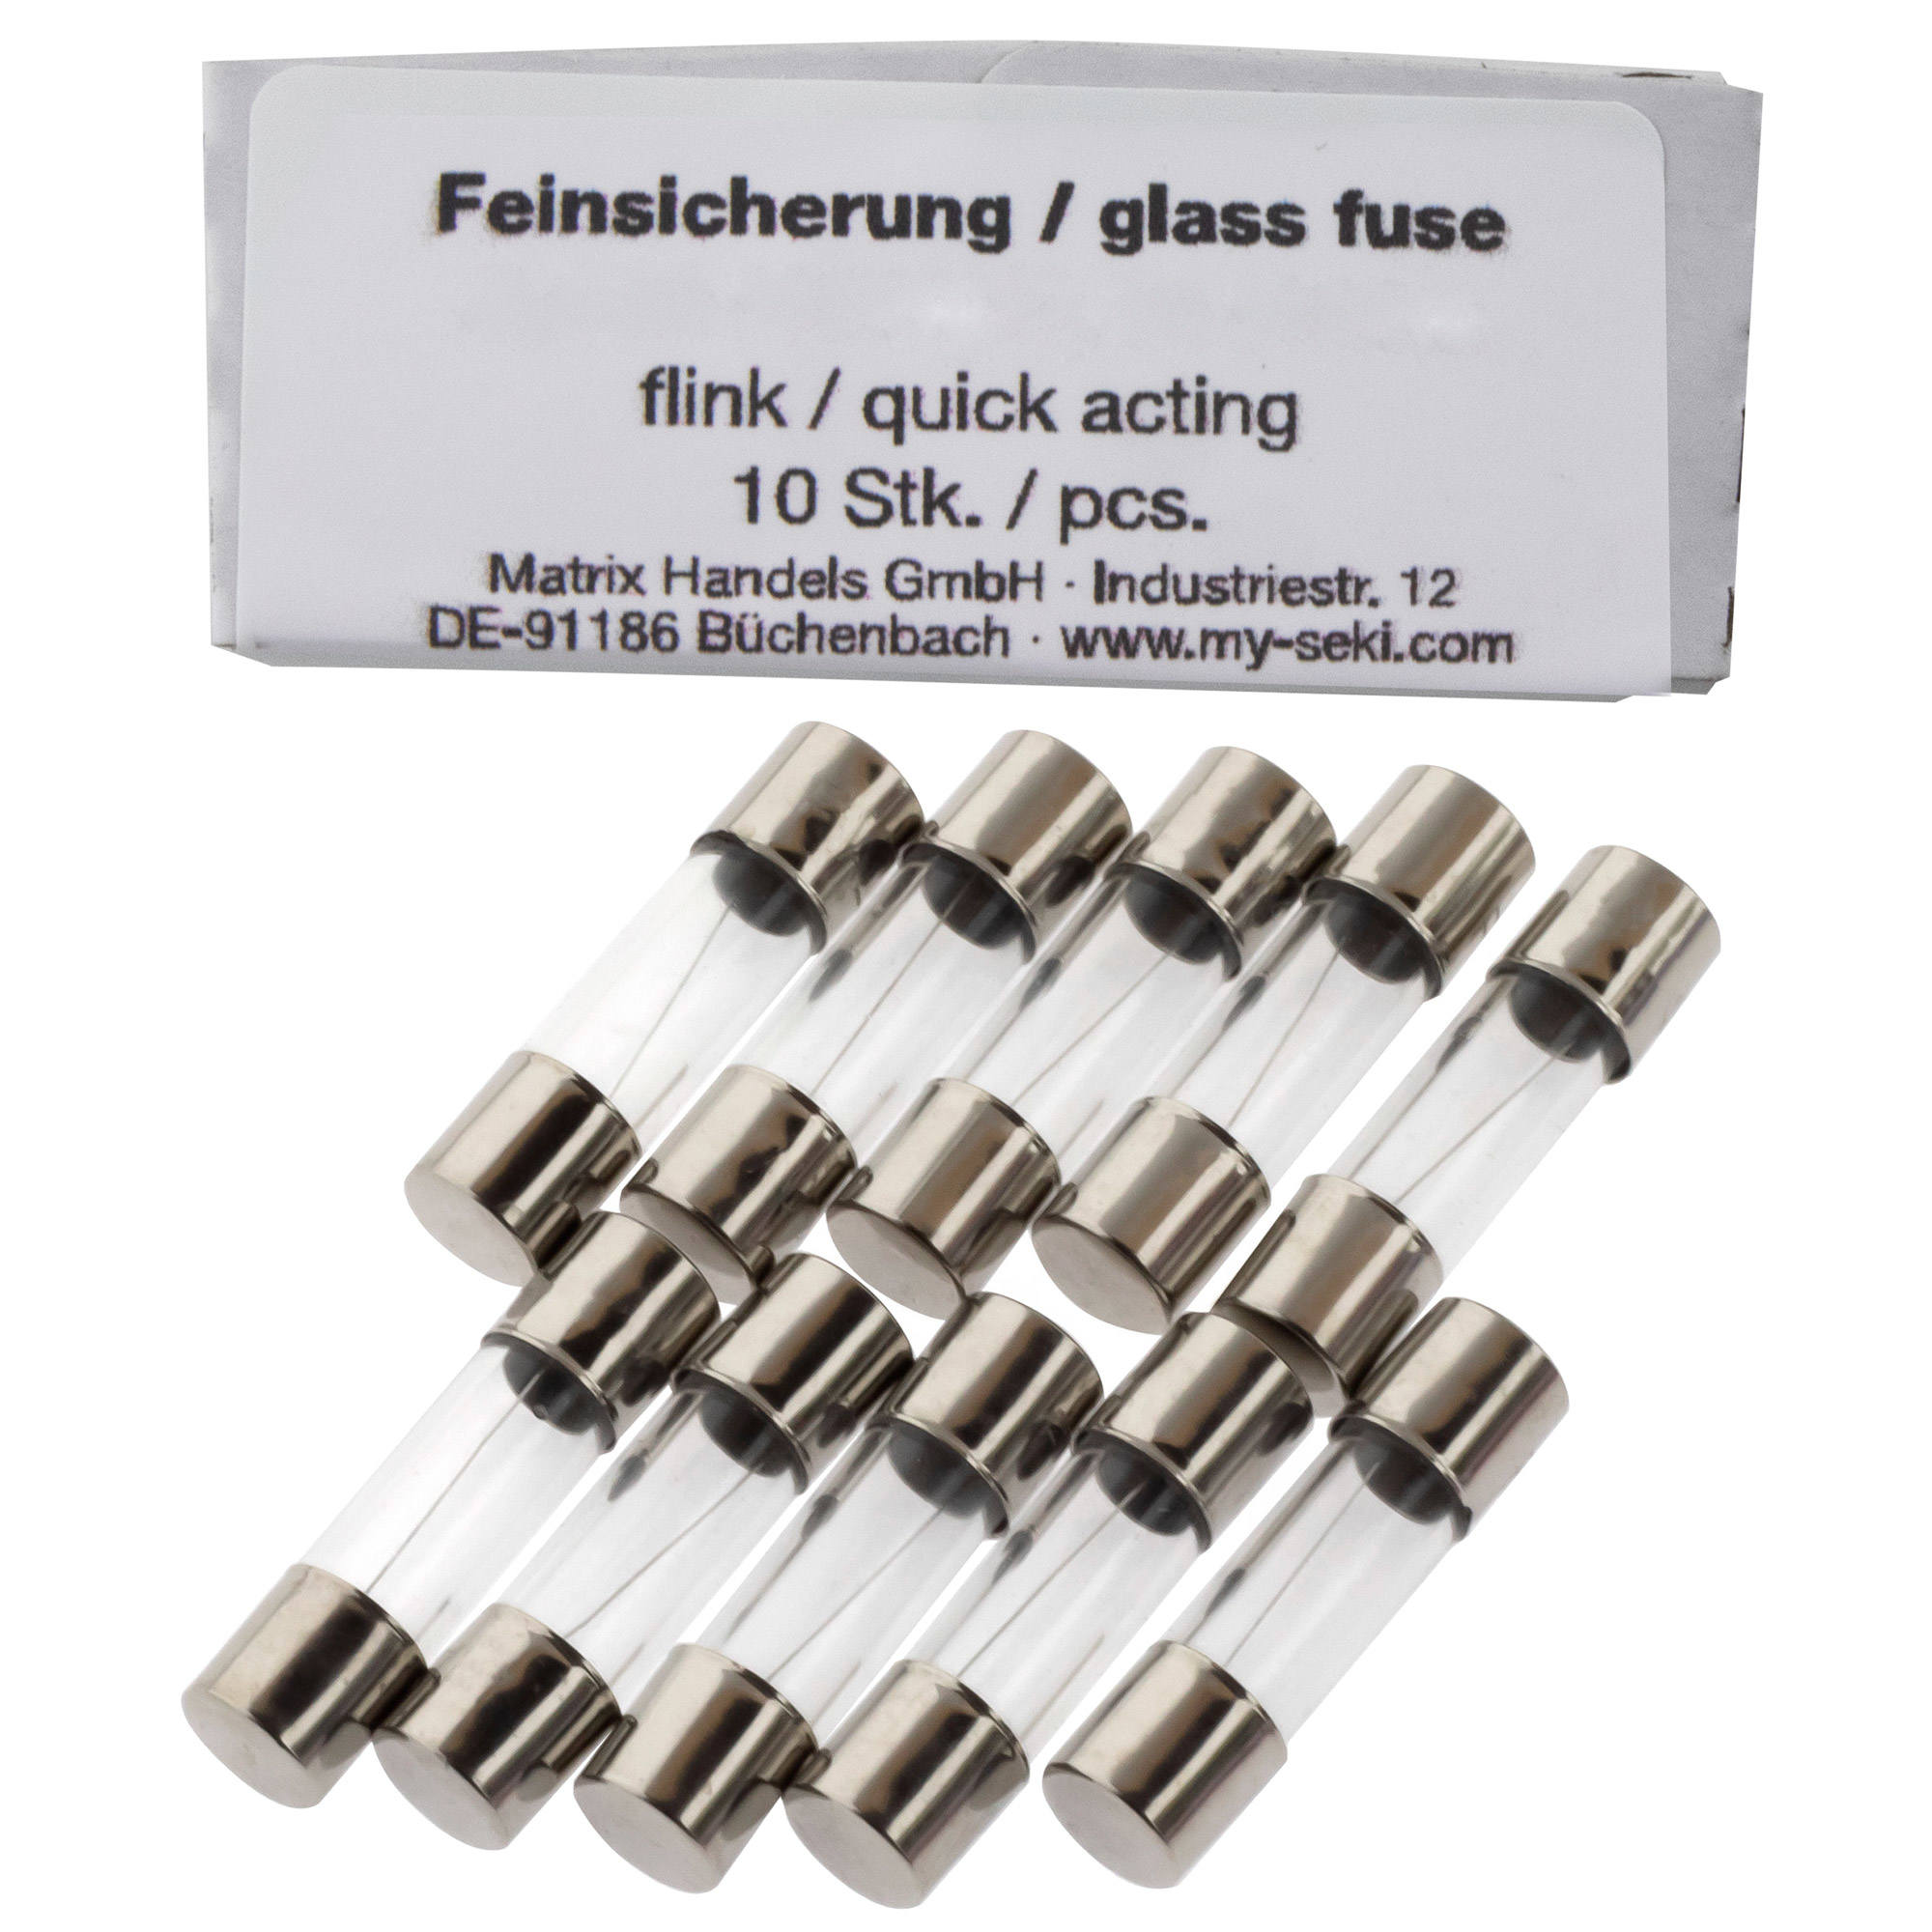 Micro Fuse 0,1A (100mA), 5x20mm, quick acting